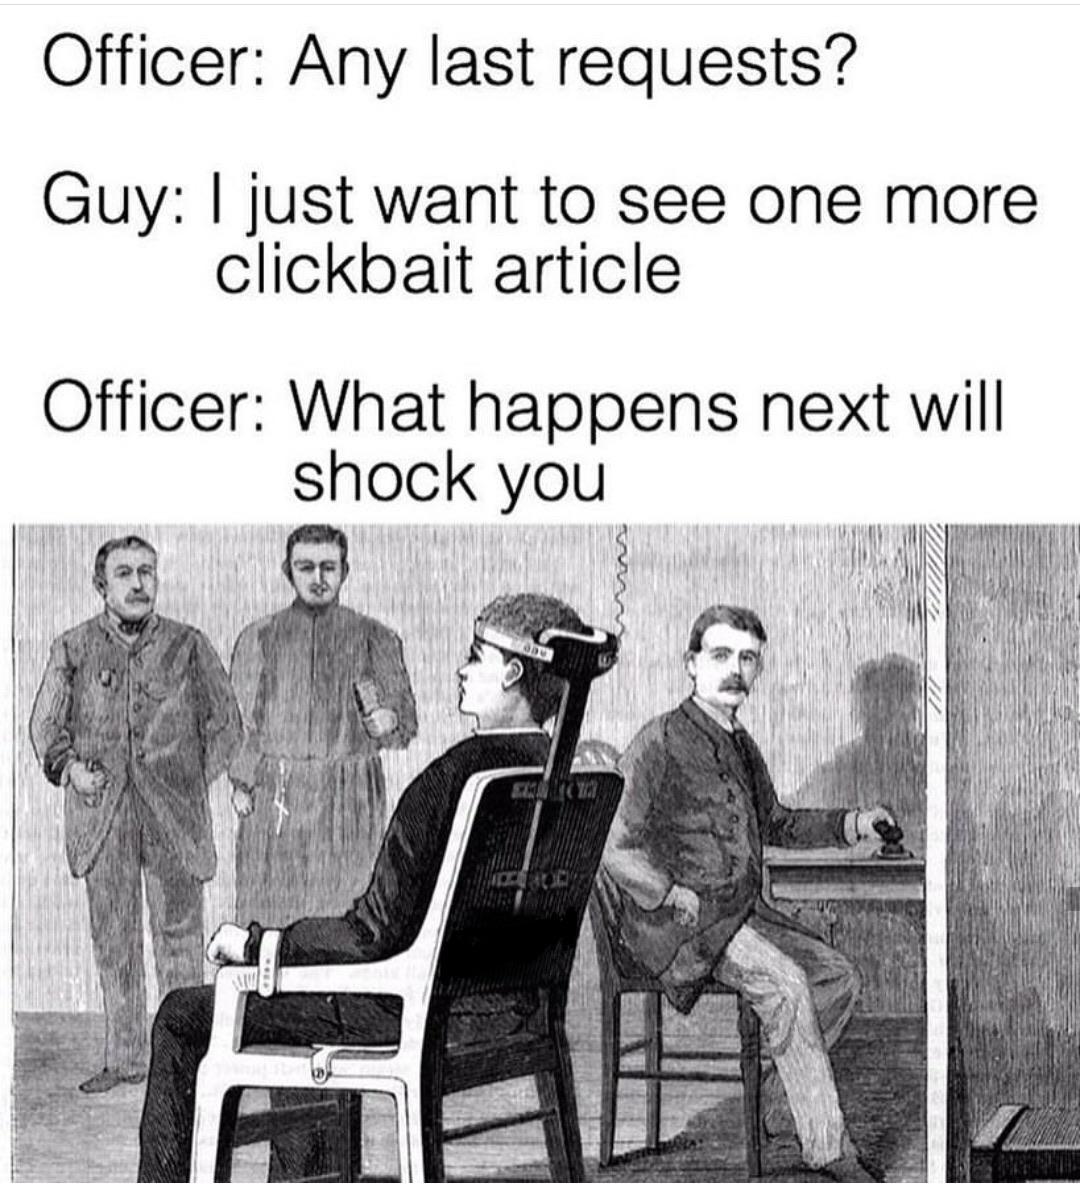 Funny, French other memes Funny, French text: Officer: Any last requests? Guy: I just want to see one more clickbait article Officer: What happens next will shock you 